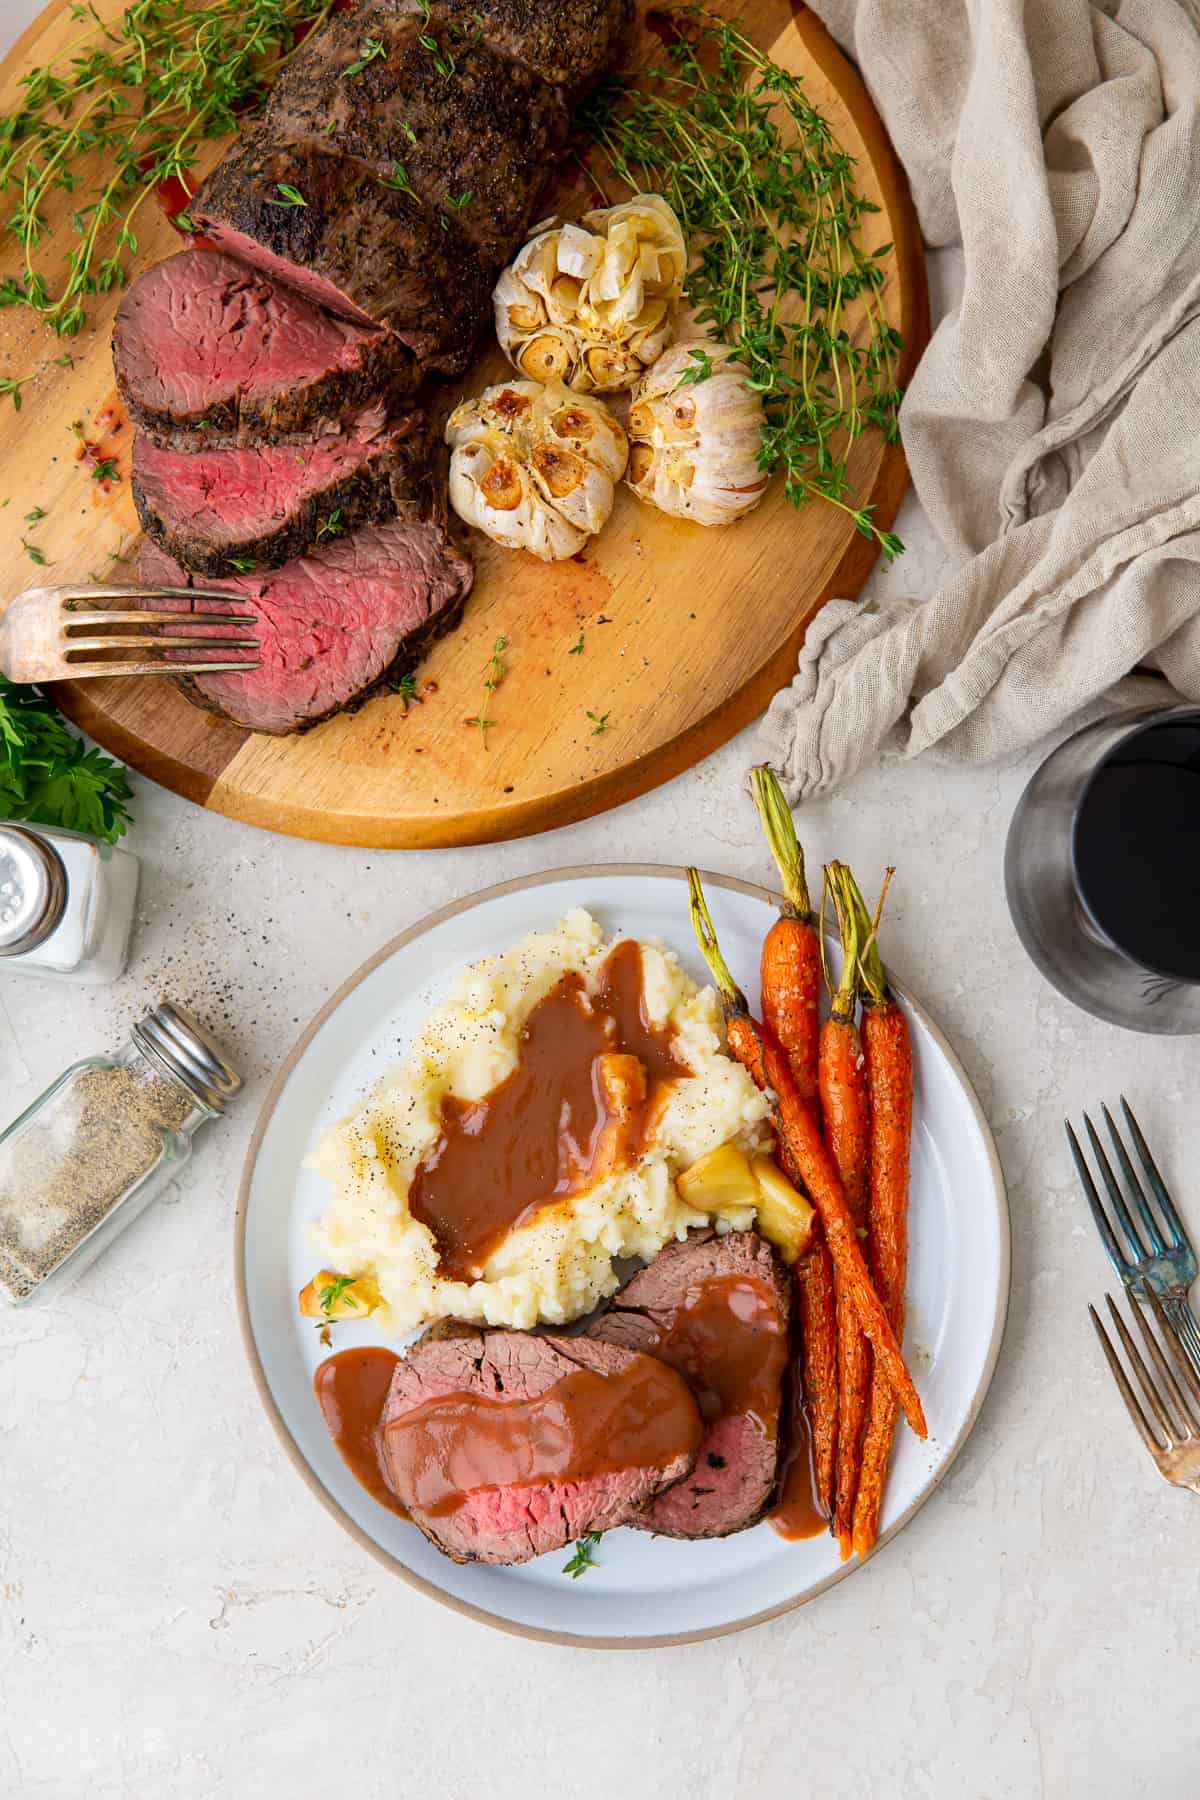 An over the top shot of beef tenderloin with gravy on a plate with mashed potatoes and carrots.